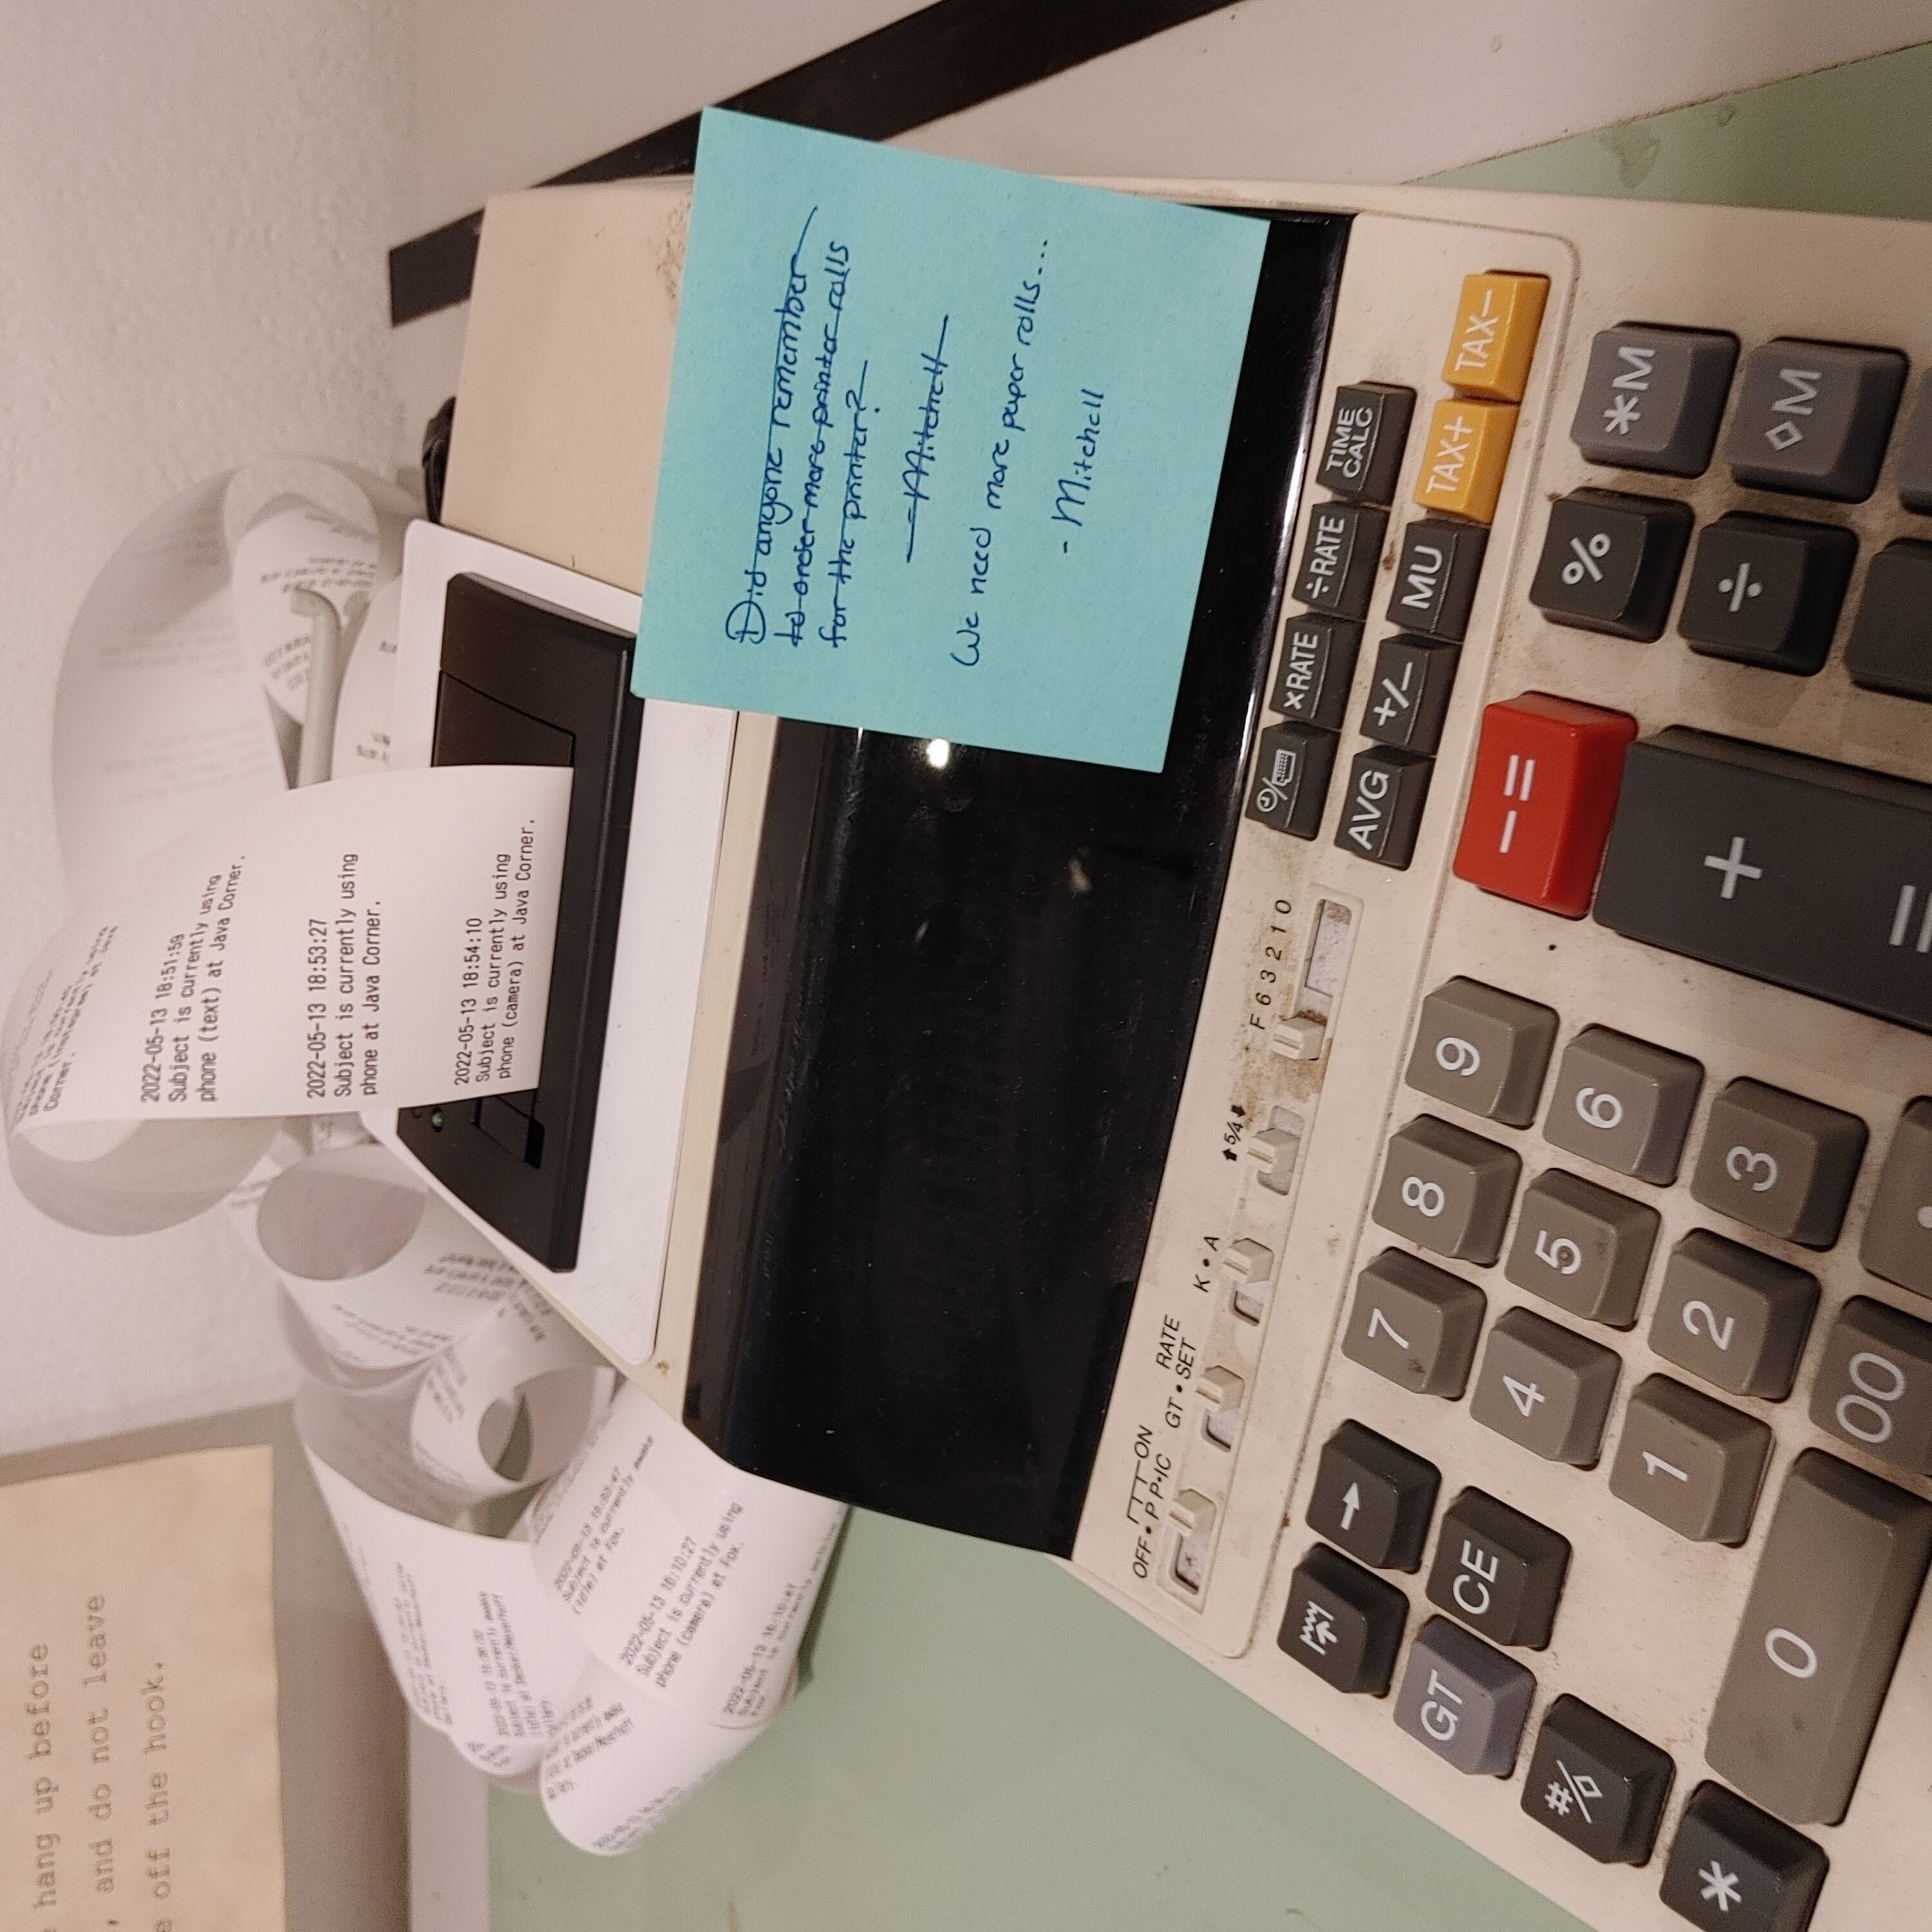 Photo of the accounting calculator close up. The logged activities of PT are legible on the spooled out paper. A blue post-it note asking for more paper is stuck to the front of the calculator.